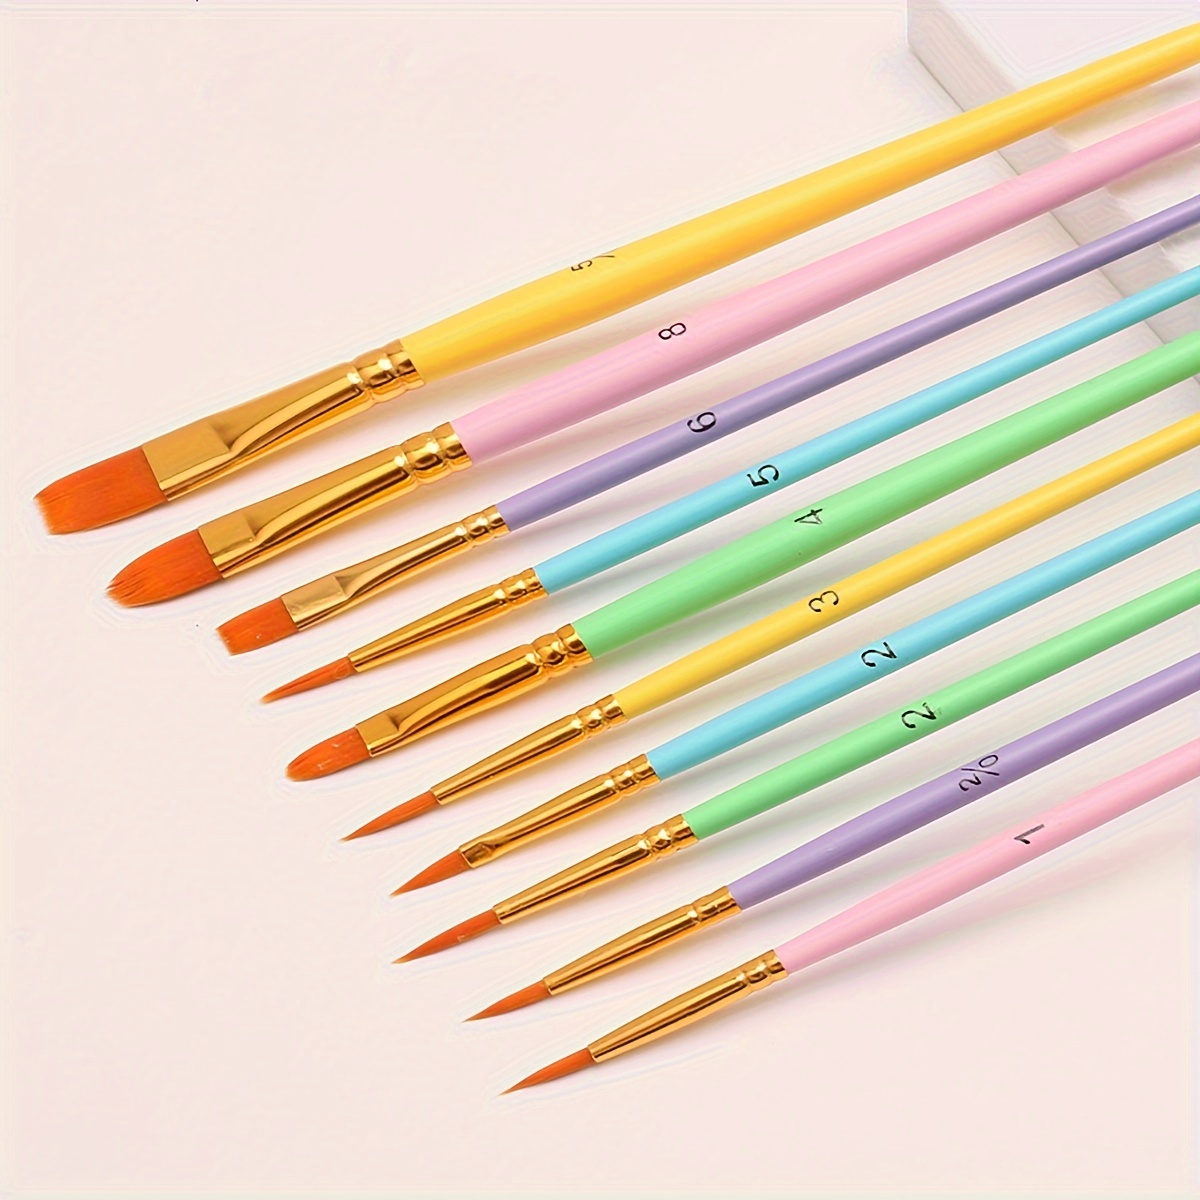 

10pcs/set Multi-colorful Watercolor Paint Brush Pen Set-nylon Hair, Wooden Handle-for Diy Oil, Acrylic Painting-art Supplies For Halloween, Christmas,thanksgiving Gift